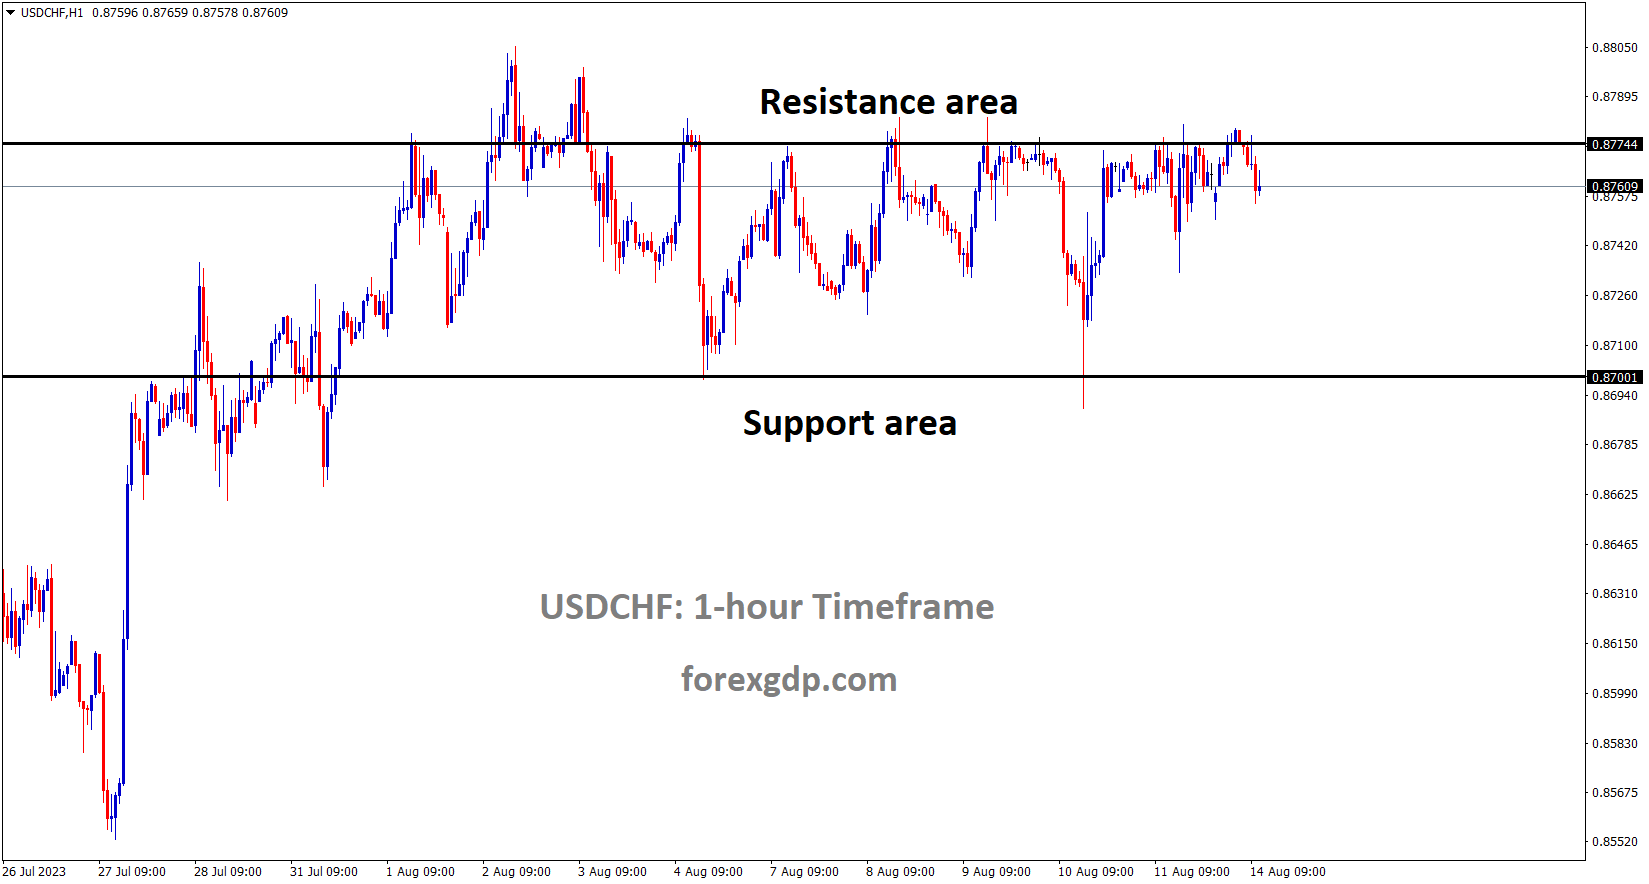 USDCHF is moving in the Box pattern and the market has fallen from the resistance area of the pattern